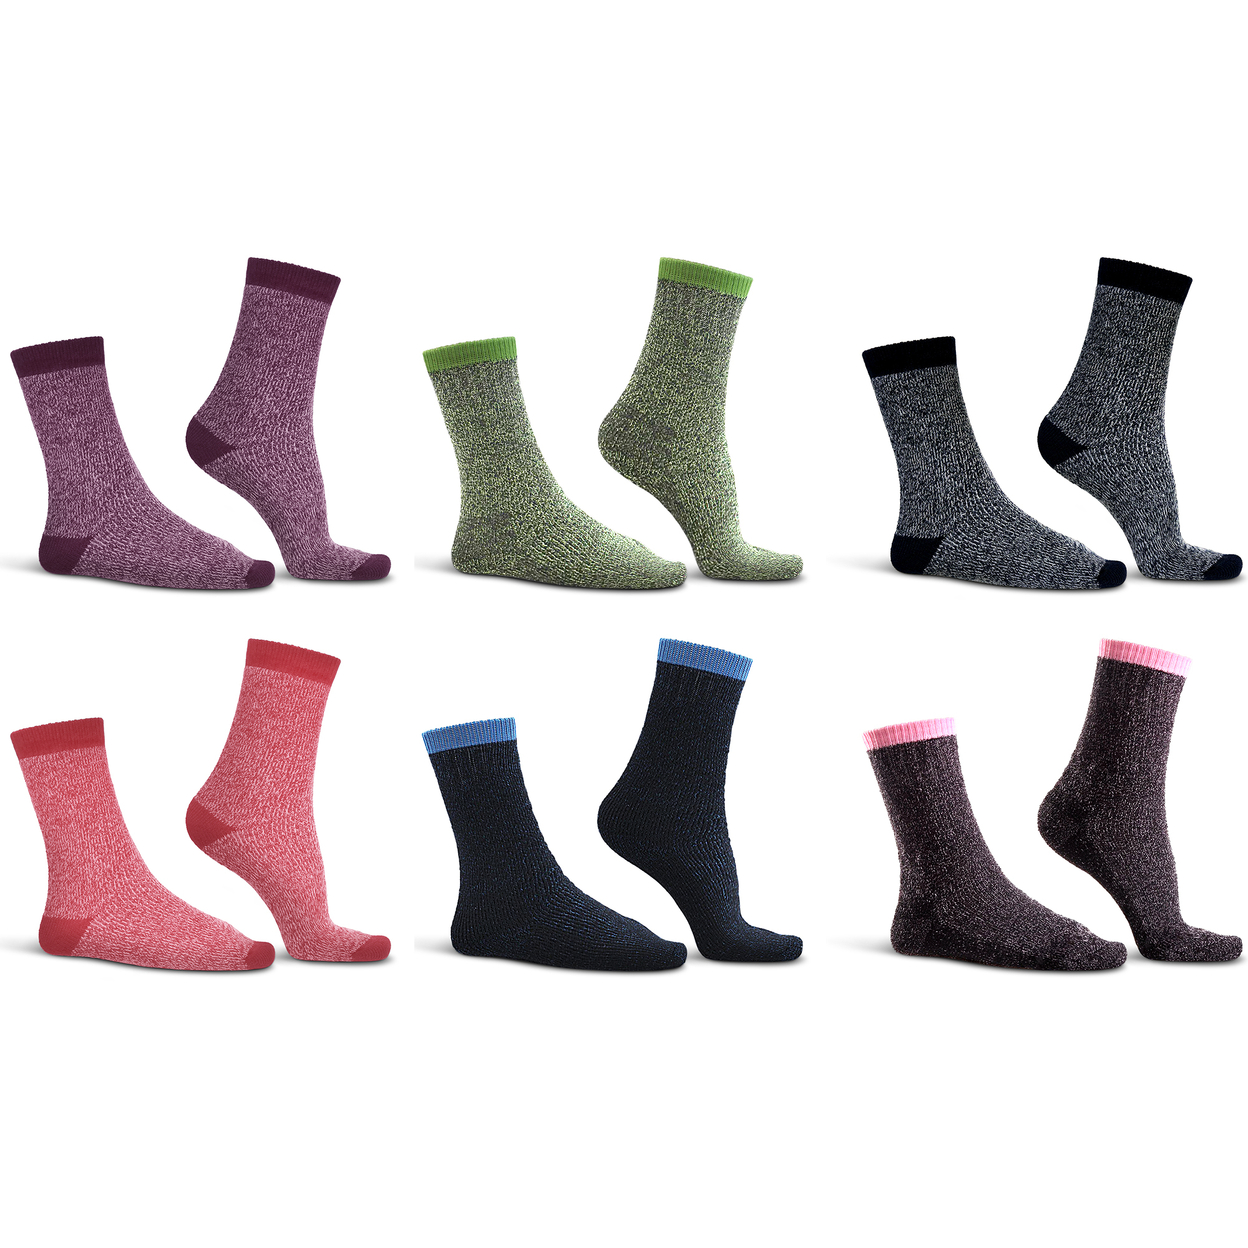 6-Pairs: Women's Cozy Soft Thick Winter Warm Thermal Insulated Heated Crew Socks